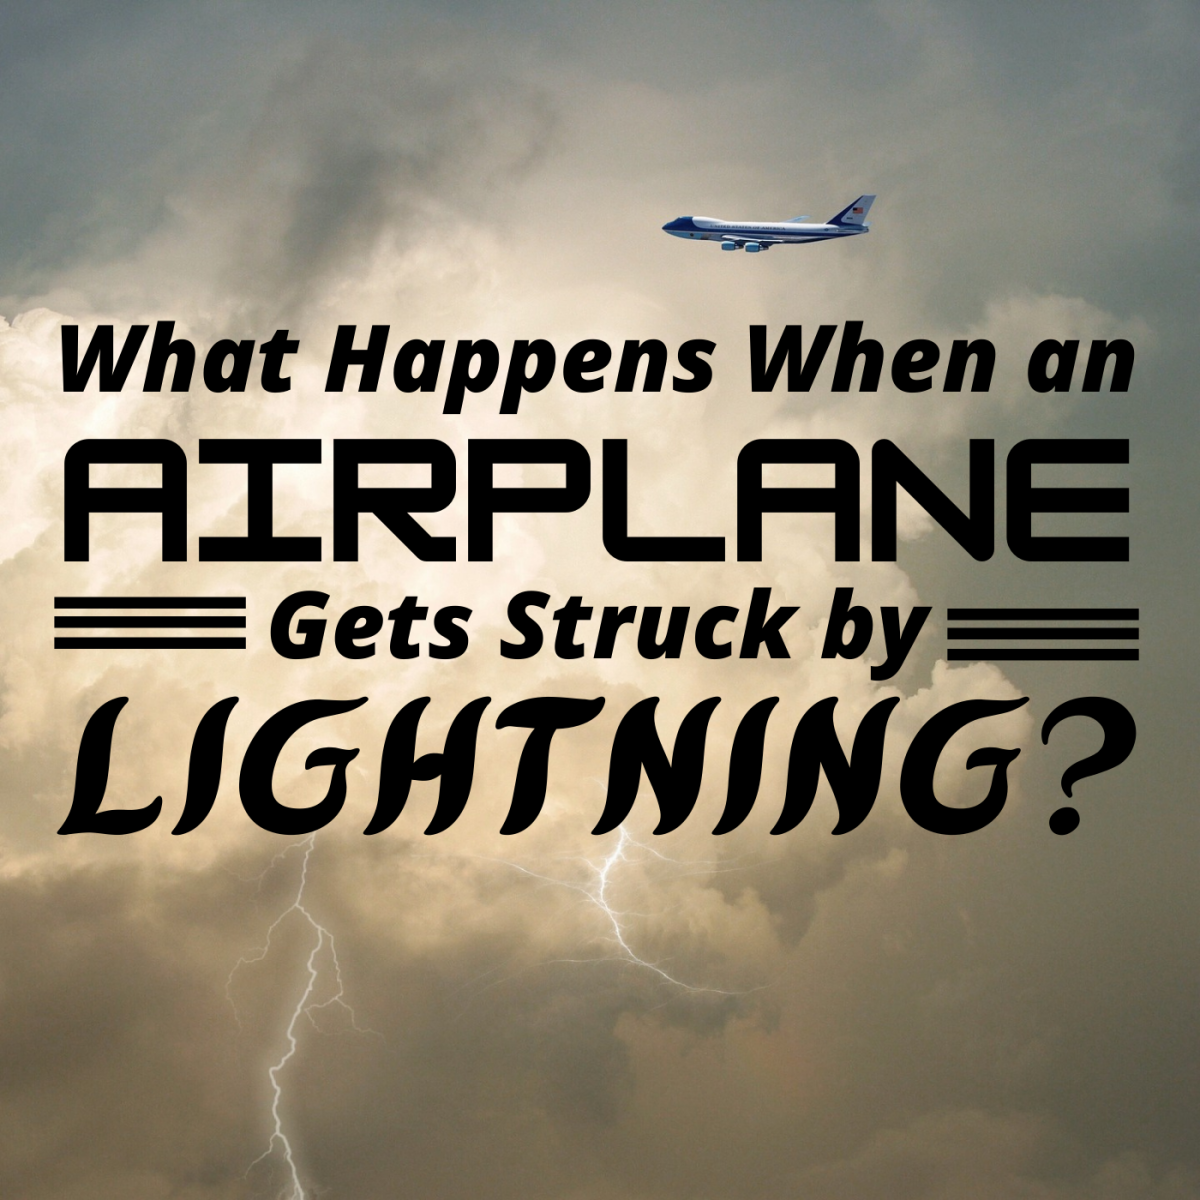 How Are Planes Protected From Lightning Strikes Owlcation 